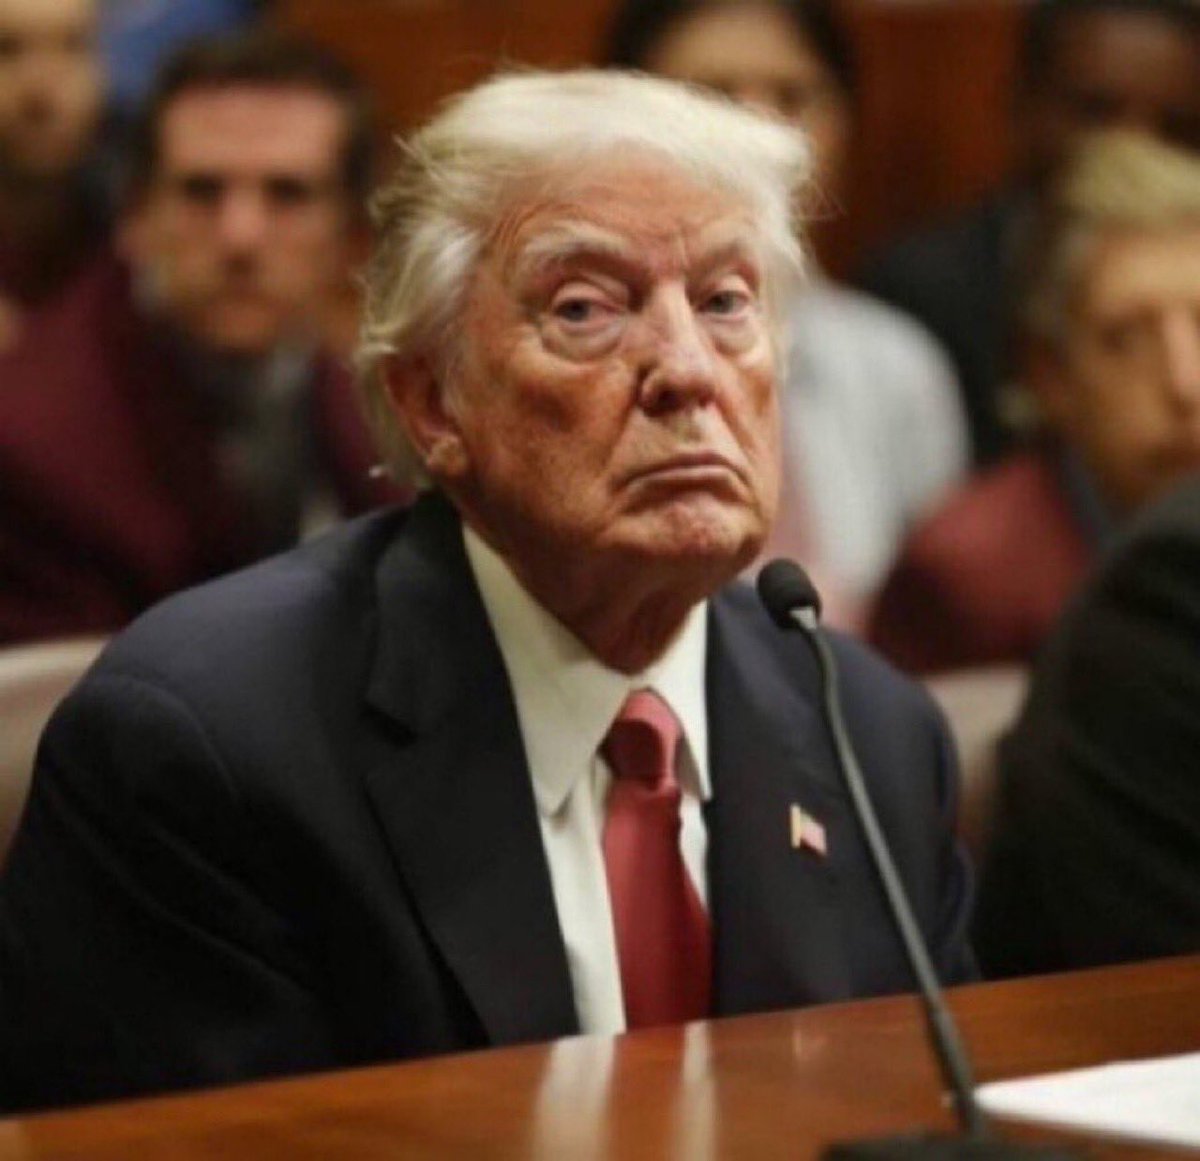 I imagine that every wrinkle, every tanning bed mark, every eye bag valise, every plastic surgeon dig, every nasty grimace scar, every spot, stain, speck on that face, represents the foulest deeds committed by this stunningly wretched, malignant narcissist villian